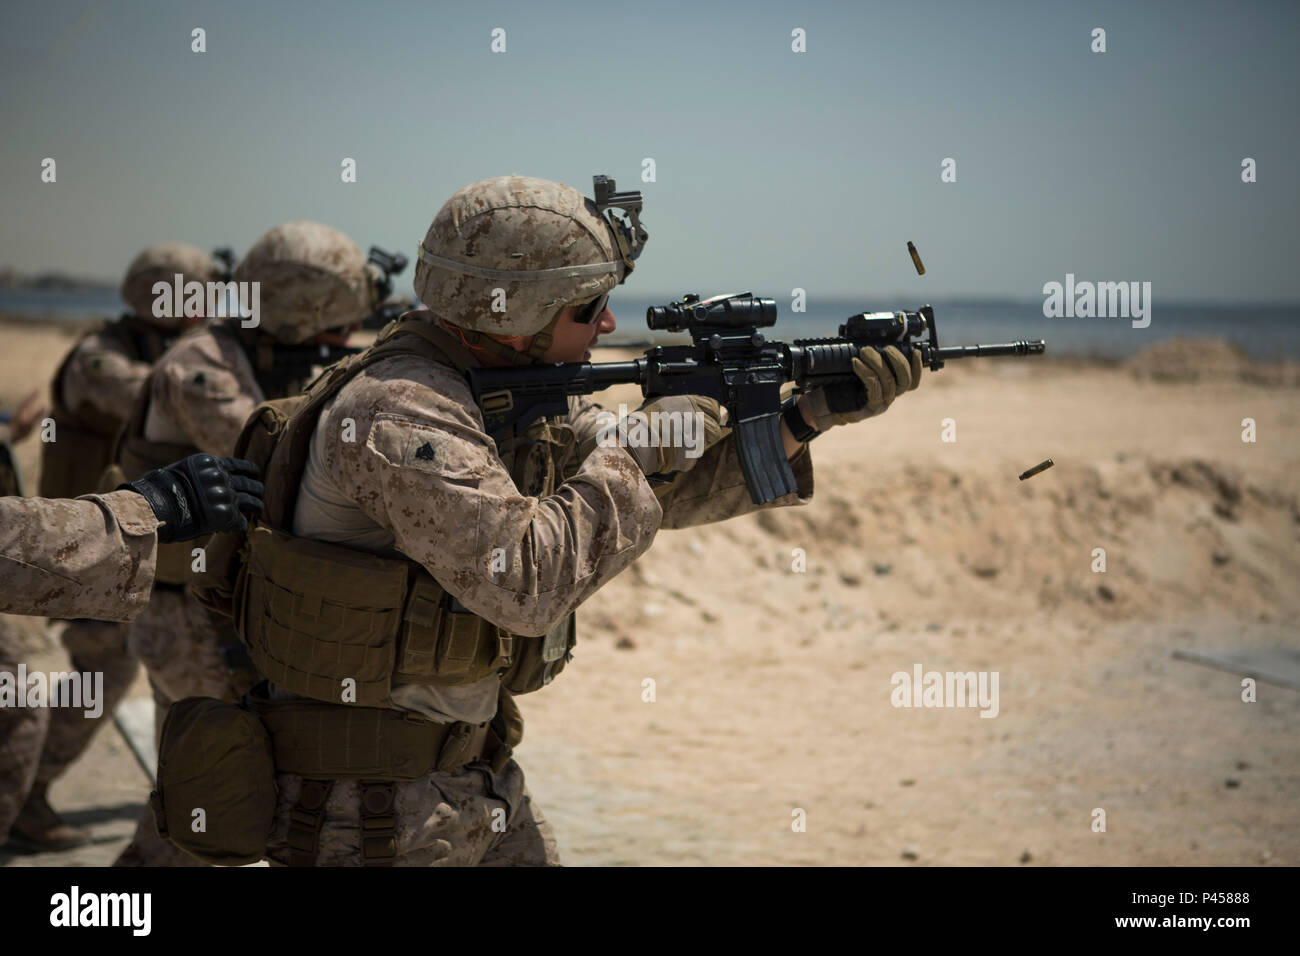 U.S. Marine Corps Sgt. Zachary Runge, squad leader with Company C, Marine Wing Support Squadron 373, Special Purpose Marine Air Ground Task Force - Crisis Response - Central Command, conducts a forward assault during a combat marksmanship practice range, June 5, 2016. SPMAGTF-CR-CC is forward deployed in several host nations, with the ability to respond to a variety of contingencies rapidly and effectively. (U.S. Marine Corps photo by Sgt. Donald Holbert/ Released) Stock Photo